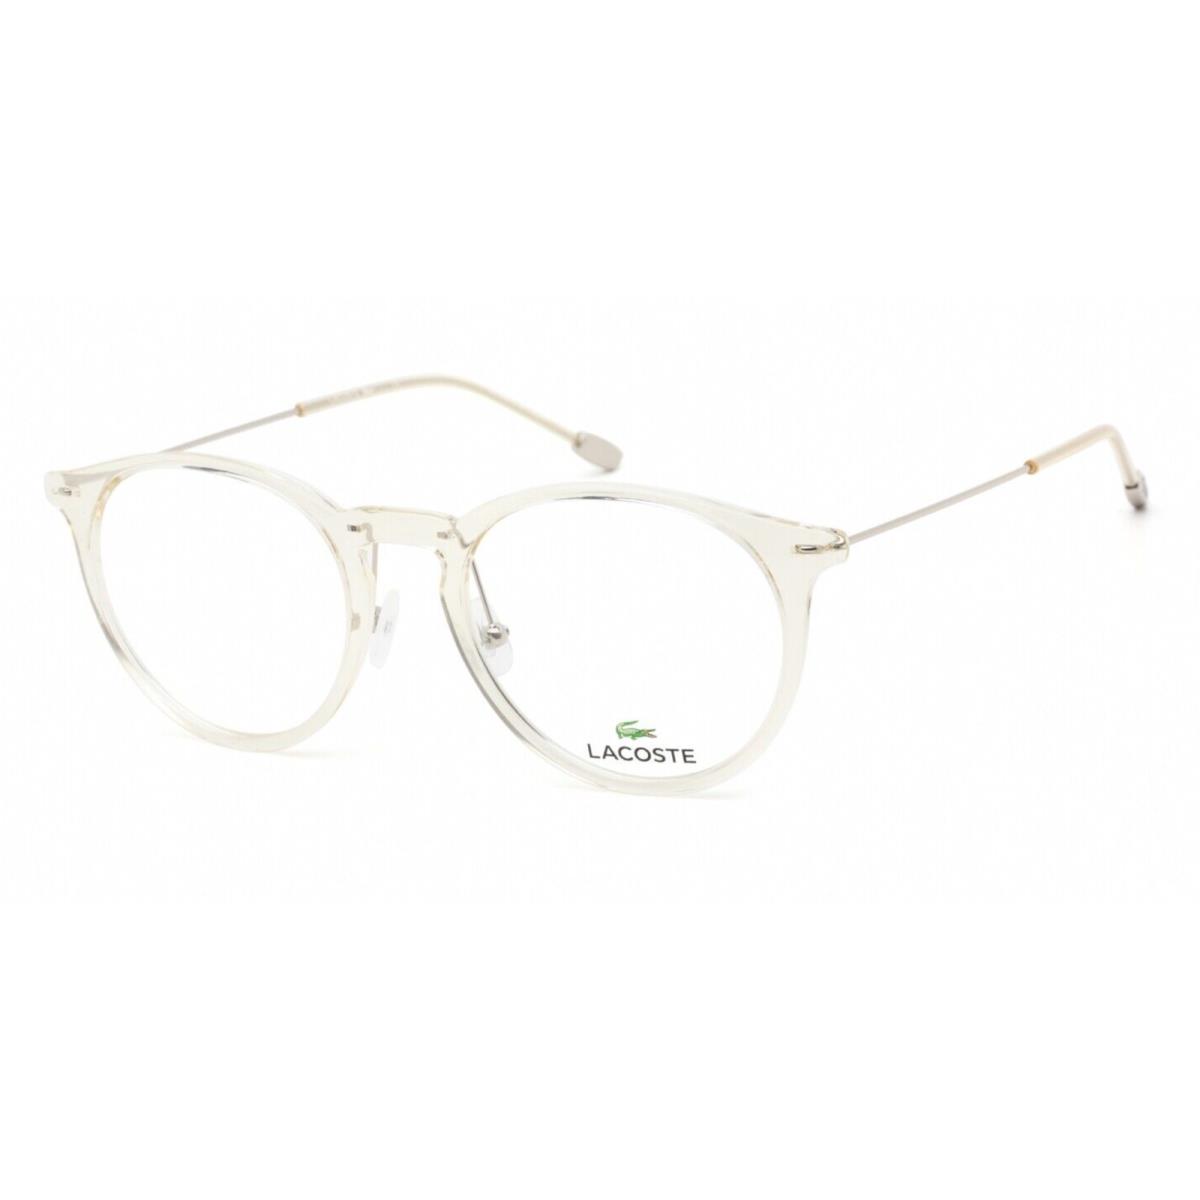 Lacoste Eyeglasses L2846 662 49-19 145 Round Crystal Clear Tan Silver Frames